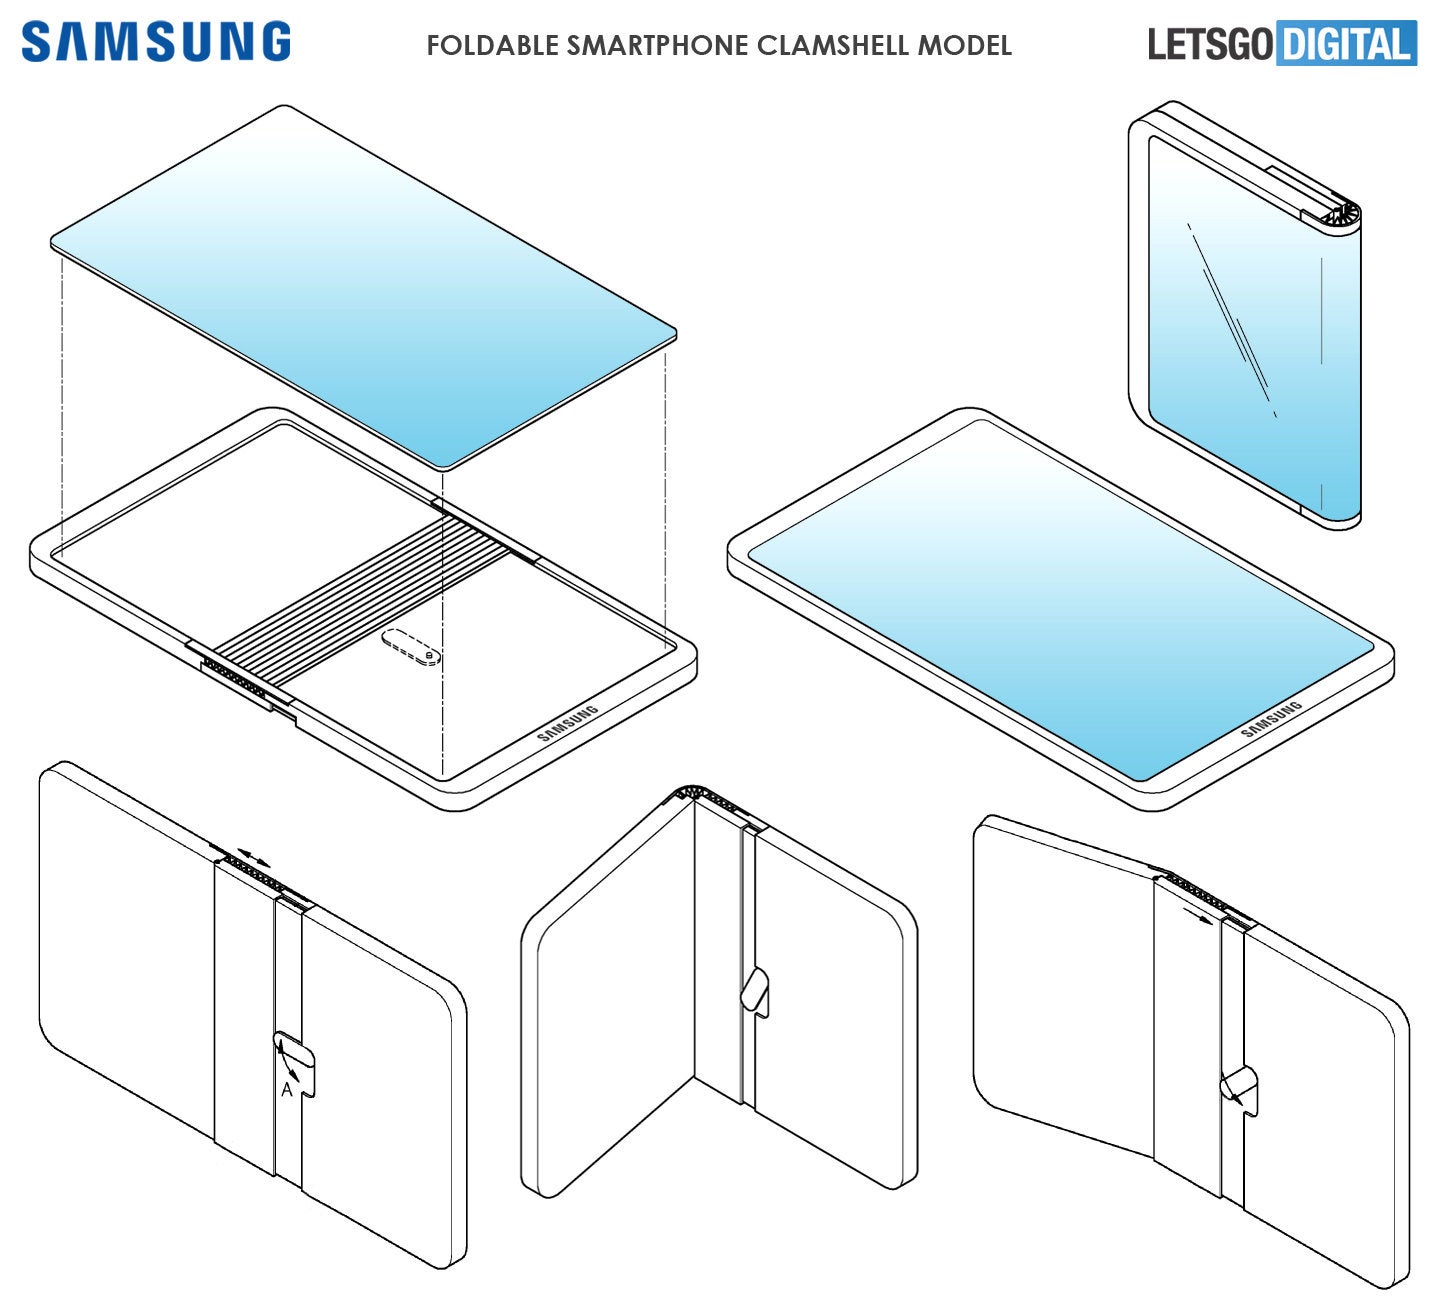 Samsung patent reveals its next foldable smartphone will be a Huawei Mate X copycat